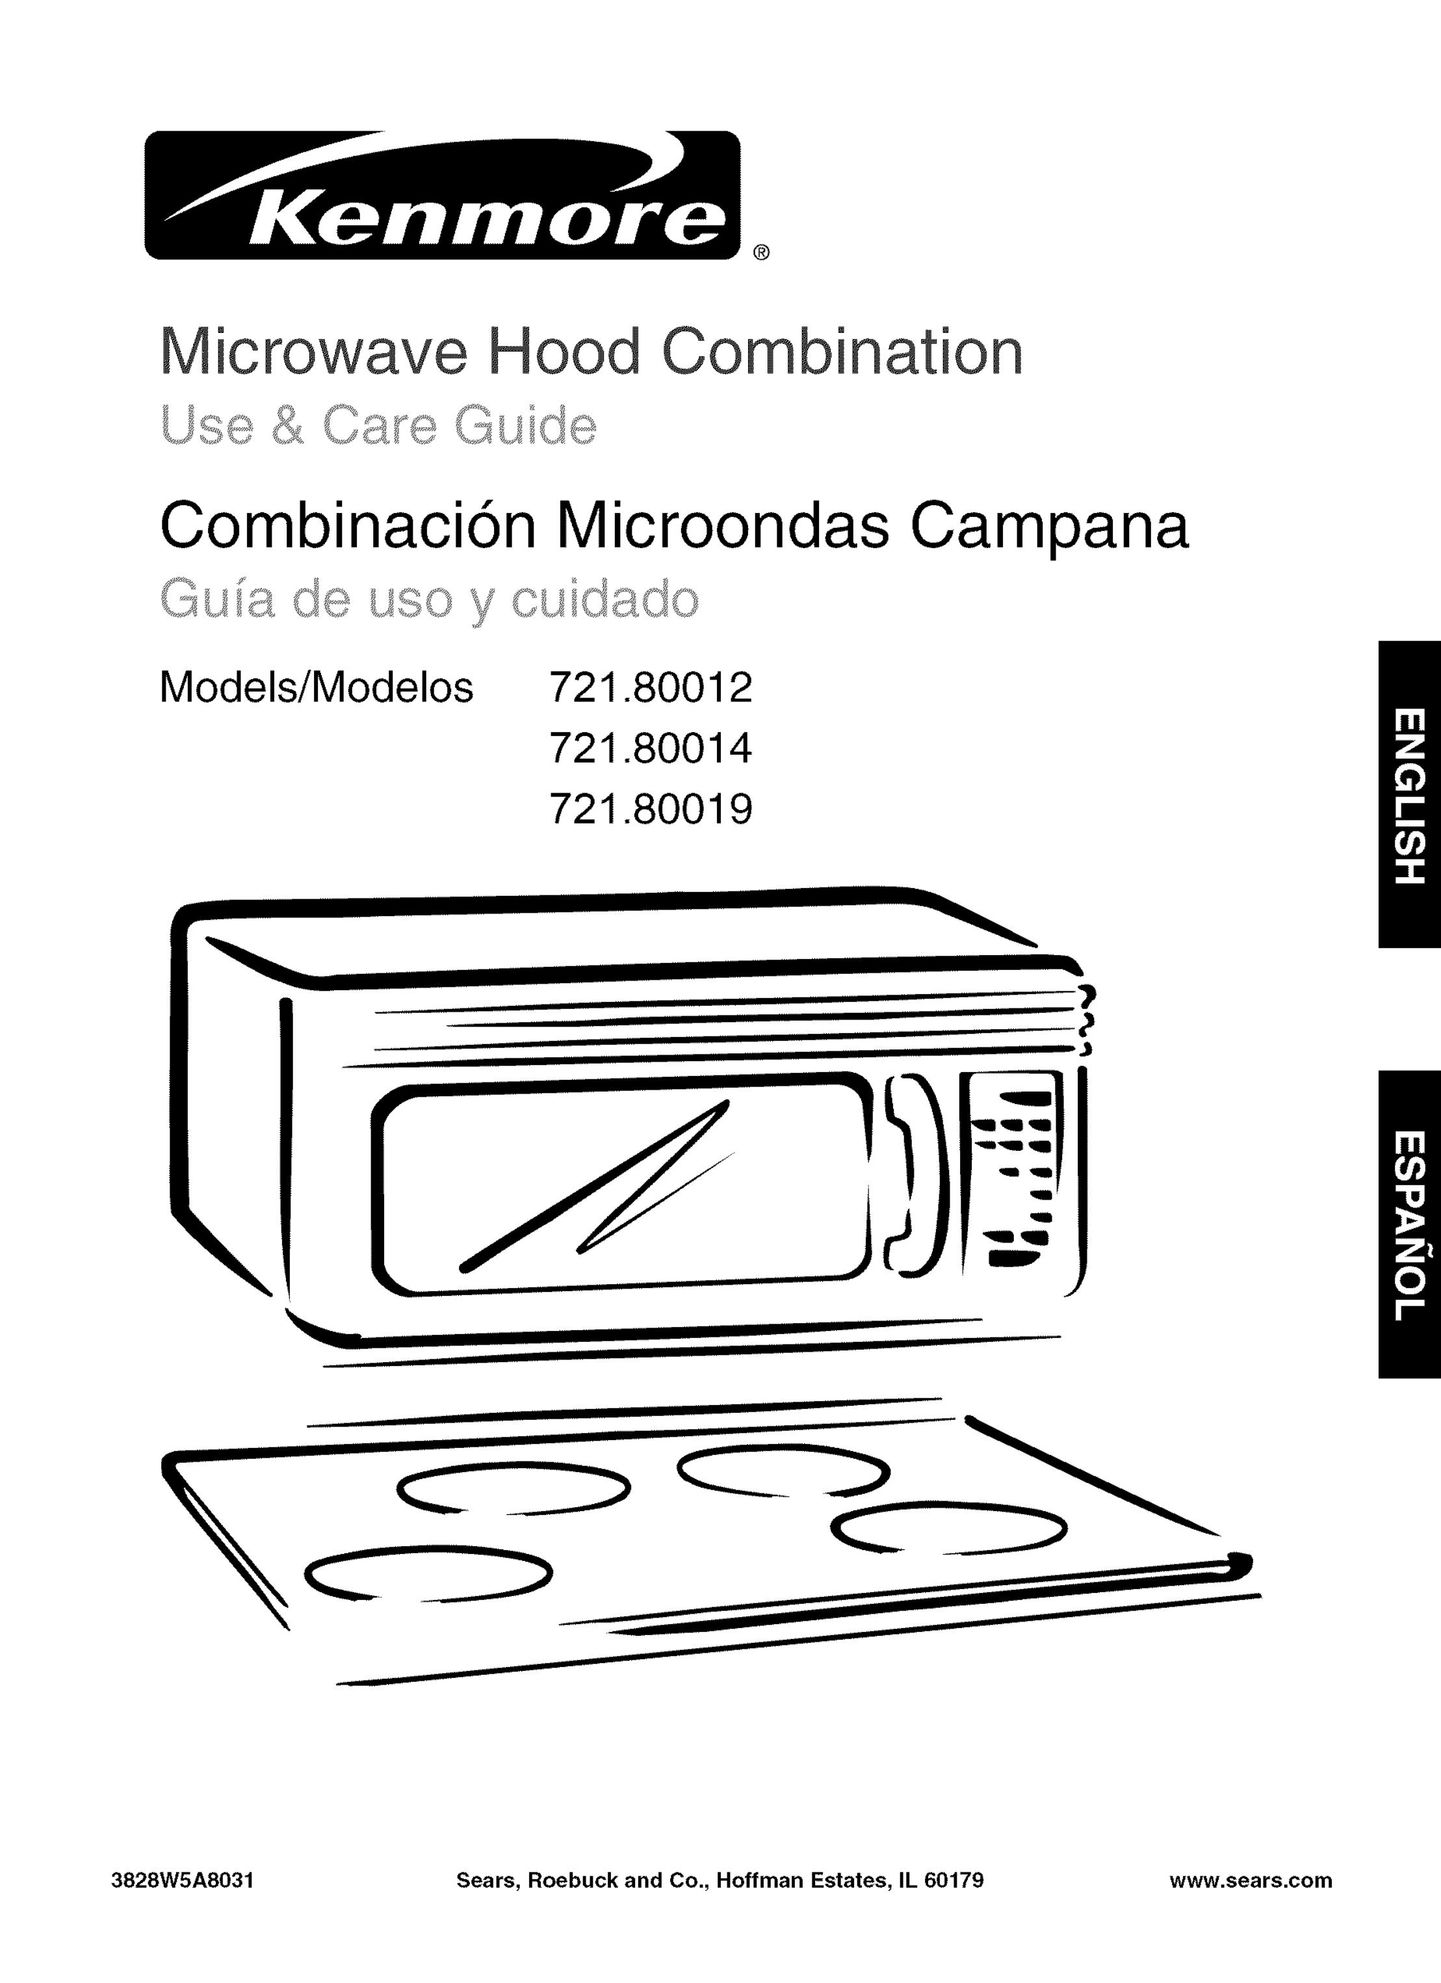 Kenmore 721.80012 Microwave Oven User Manual